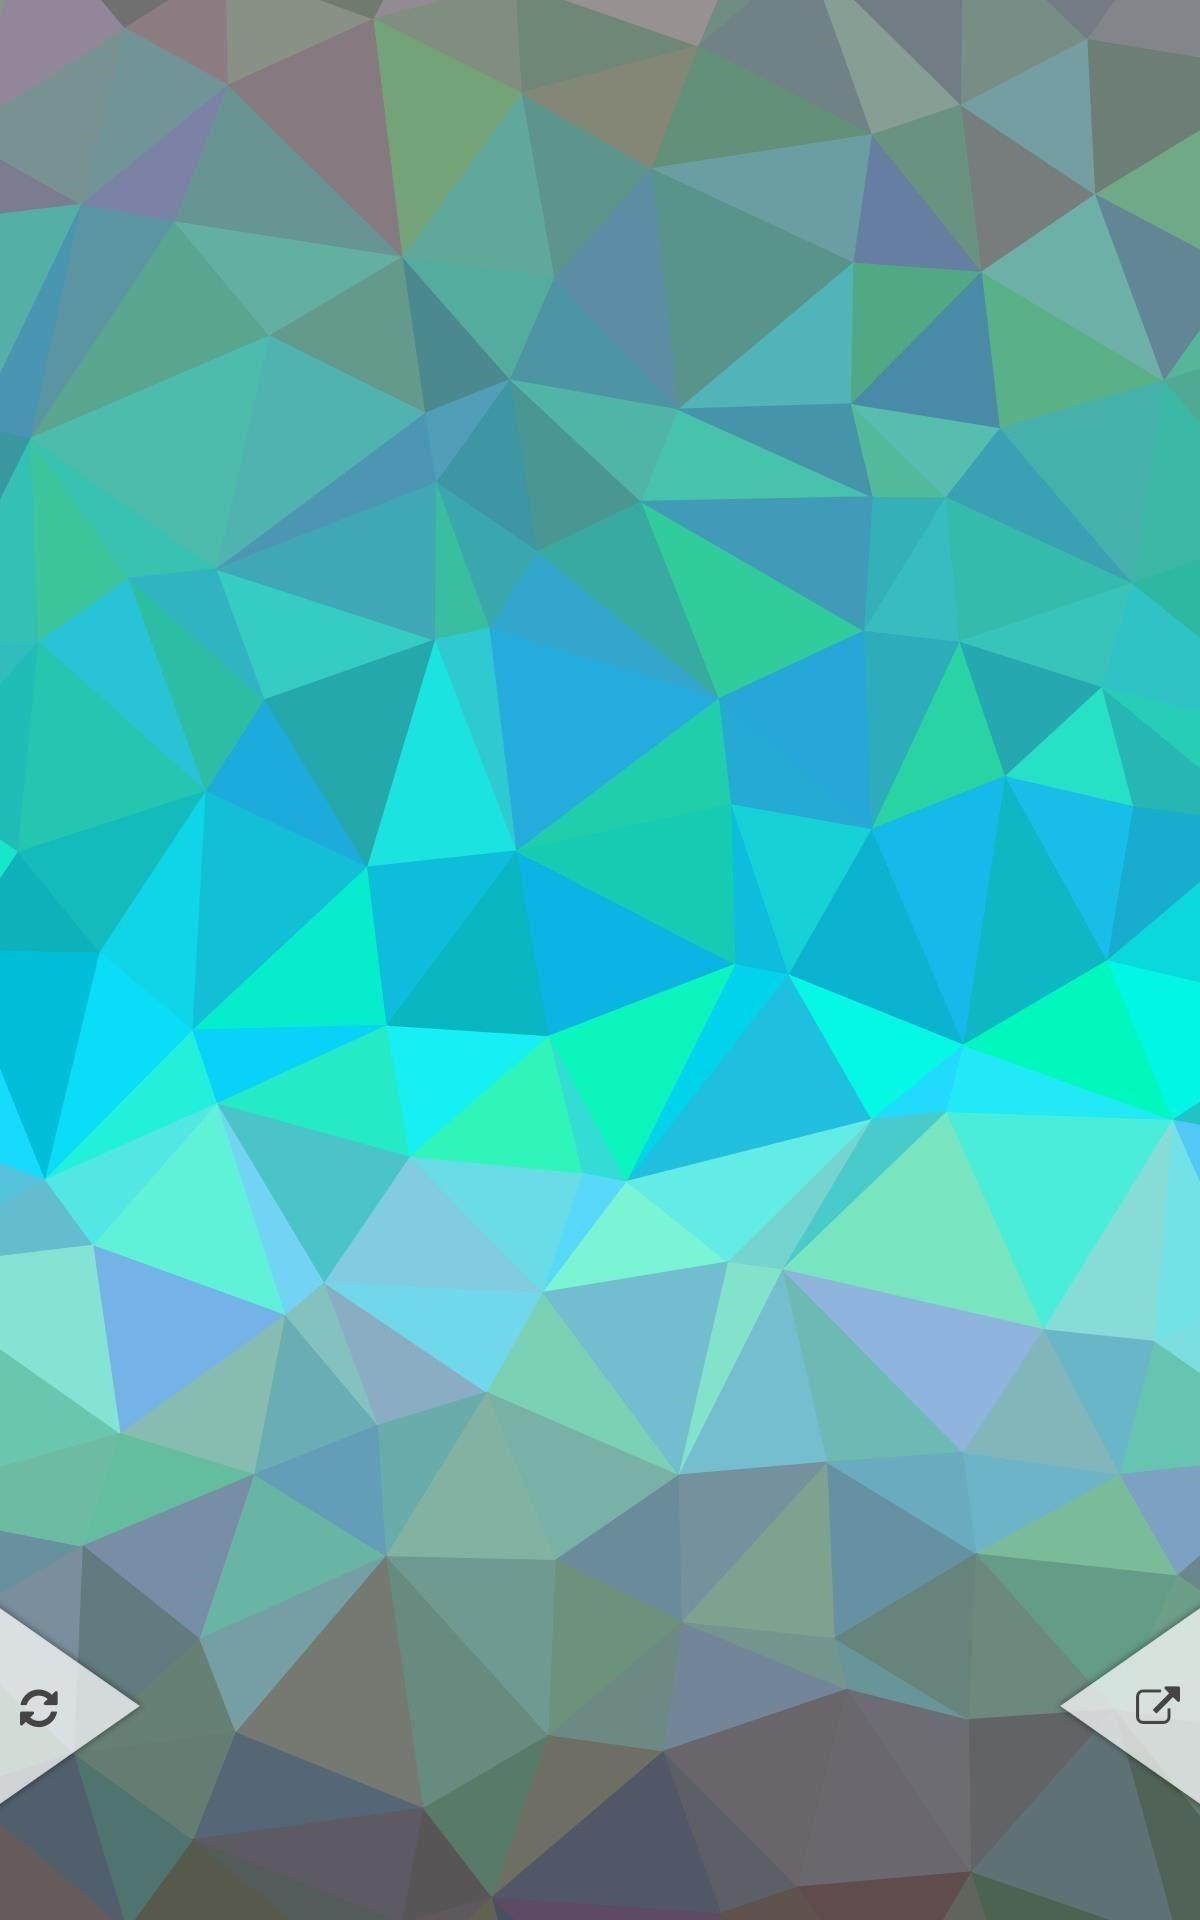 Create Your Own Custom, Polygon Shaped Wallpaper For Android